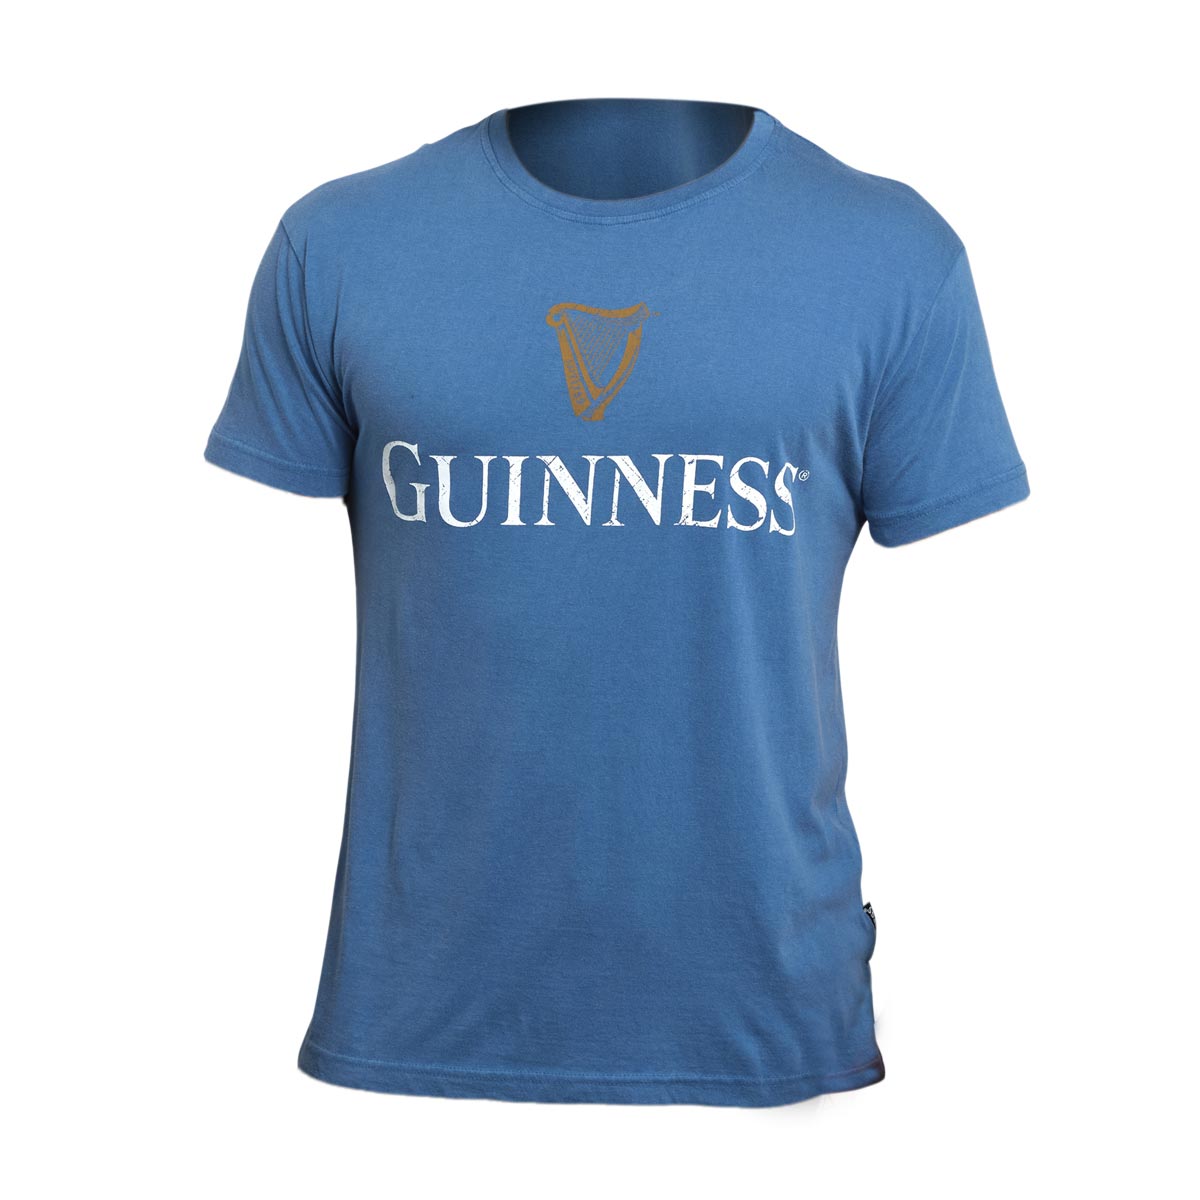 Vintage-inspired Blue Guinness Harp Premium Tee featuring a white "GUINNESS" logo and a gold harp icon on the front, this unisex t-shirt proudly displays the Guinness® Trademark Label.